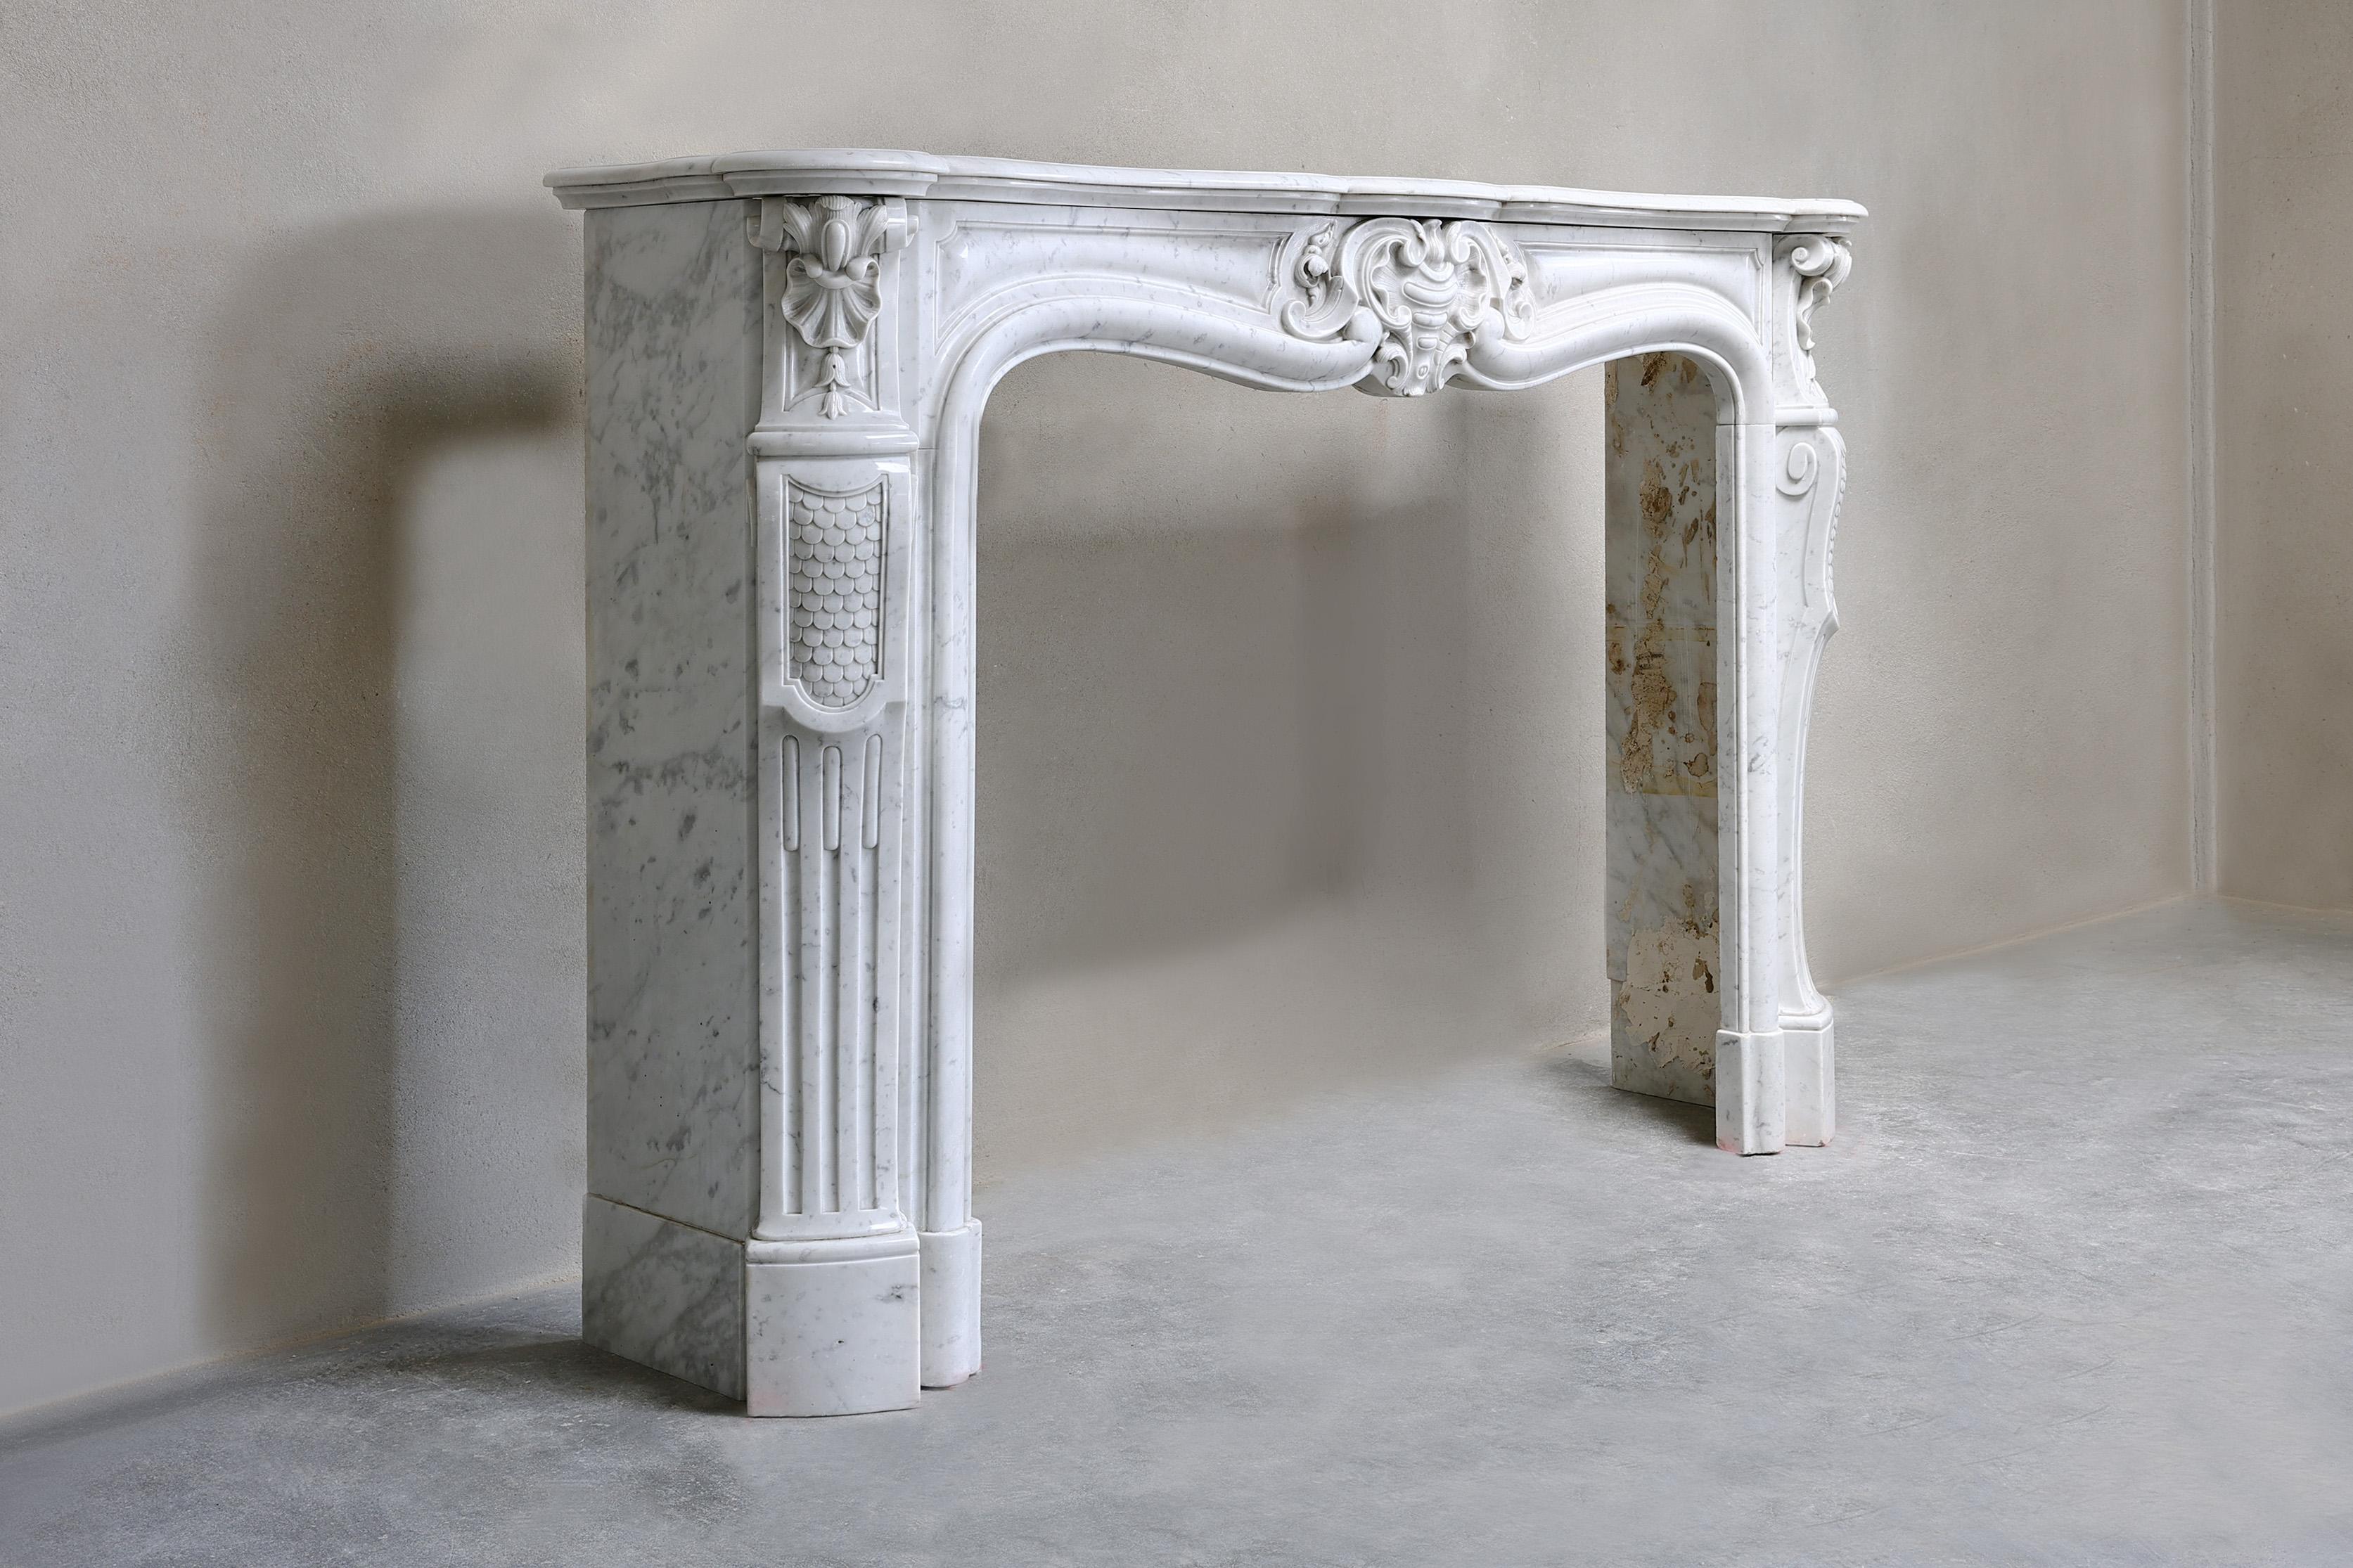 Very beautiful fireplace of white Carrara marble from the 19th century. Carrara marble originally comes from Italy, from the town of Carrara. This city is also called the city of marble because there are many marble quarries around Carrara where